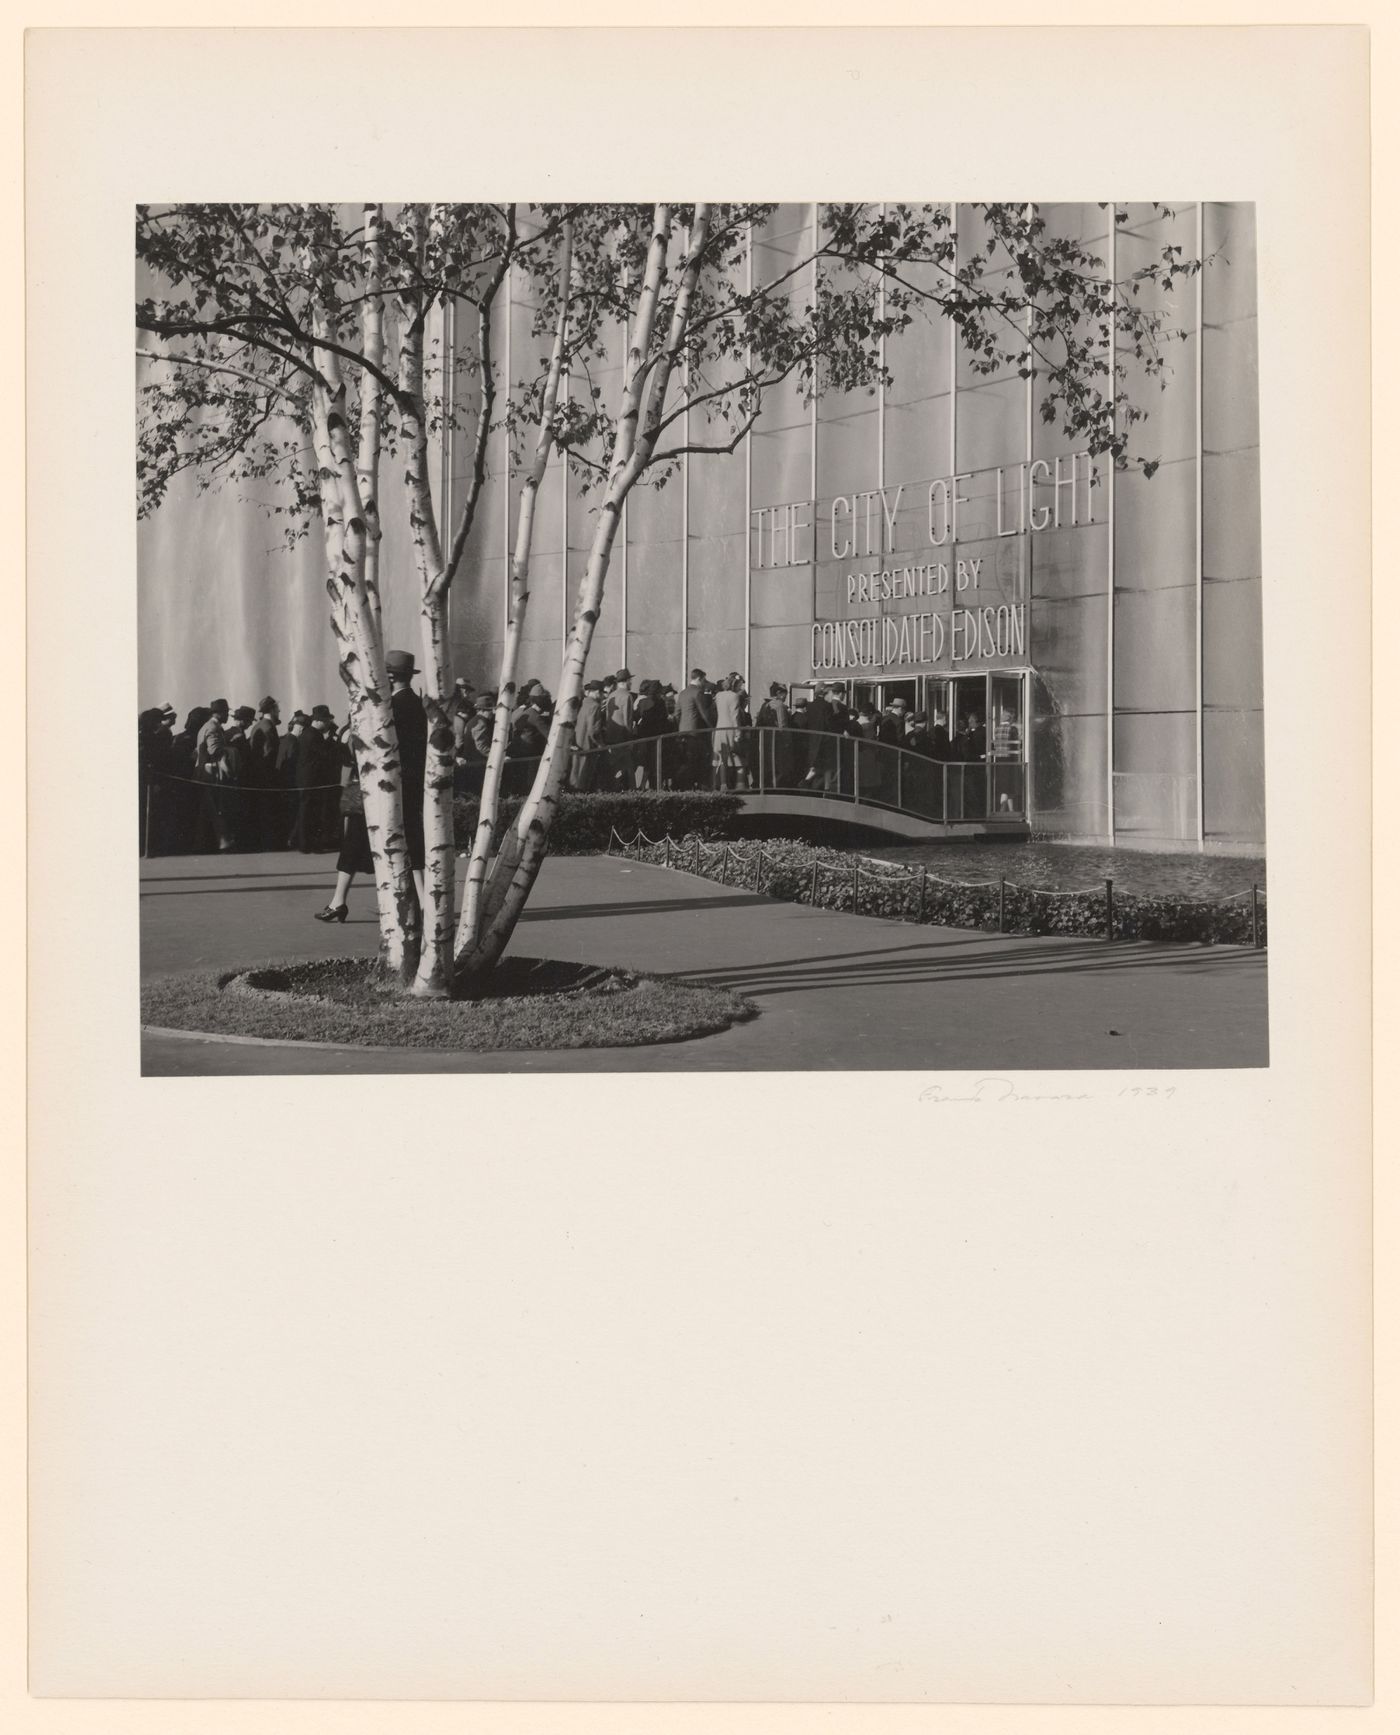 New York World's Fair (1939-1940): Crowds entering Consolidated Edison Building, "The City of Light", birch tree in foreground